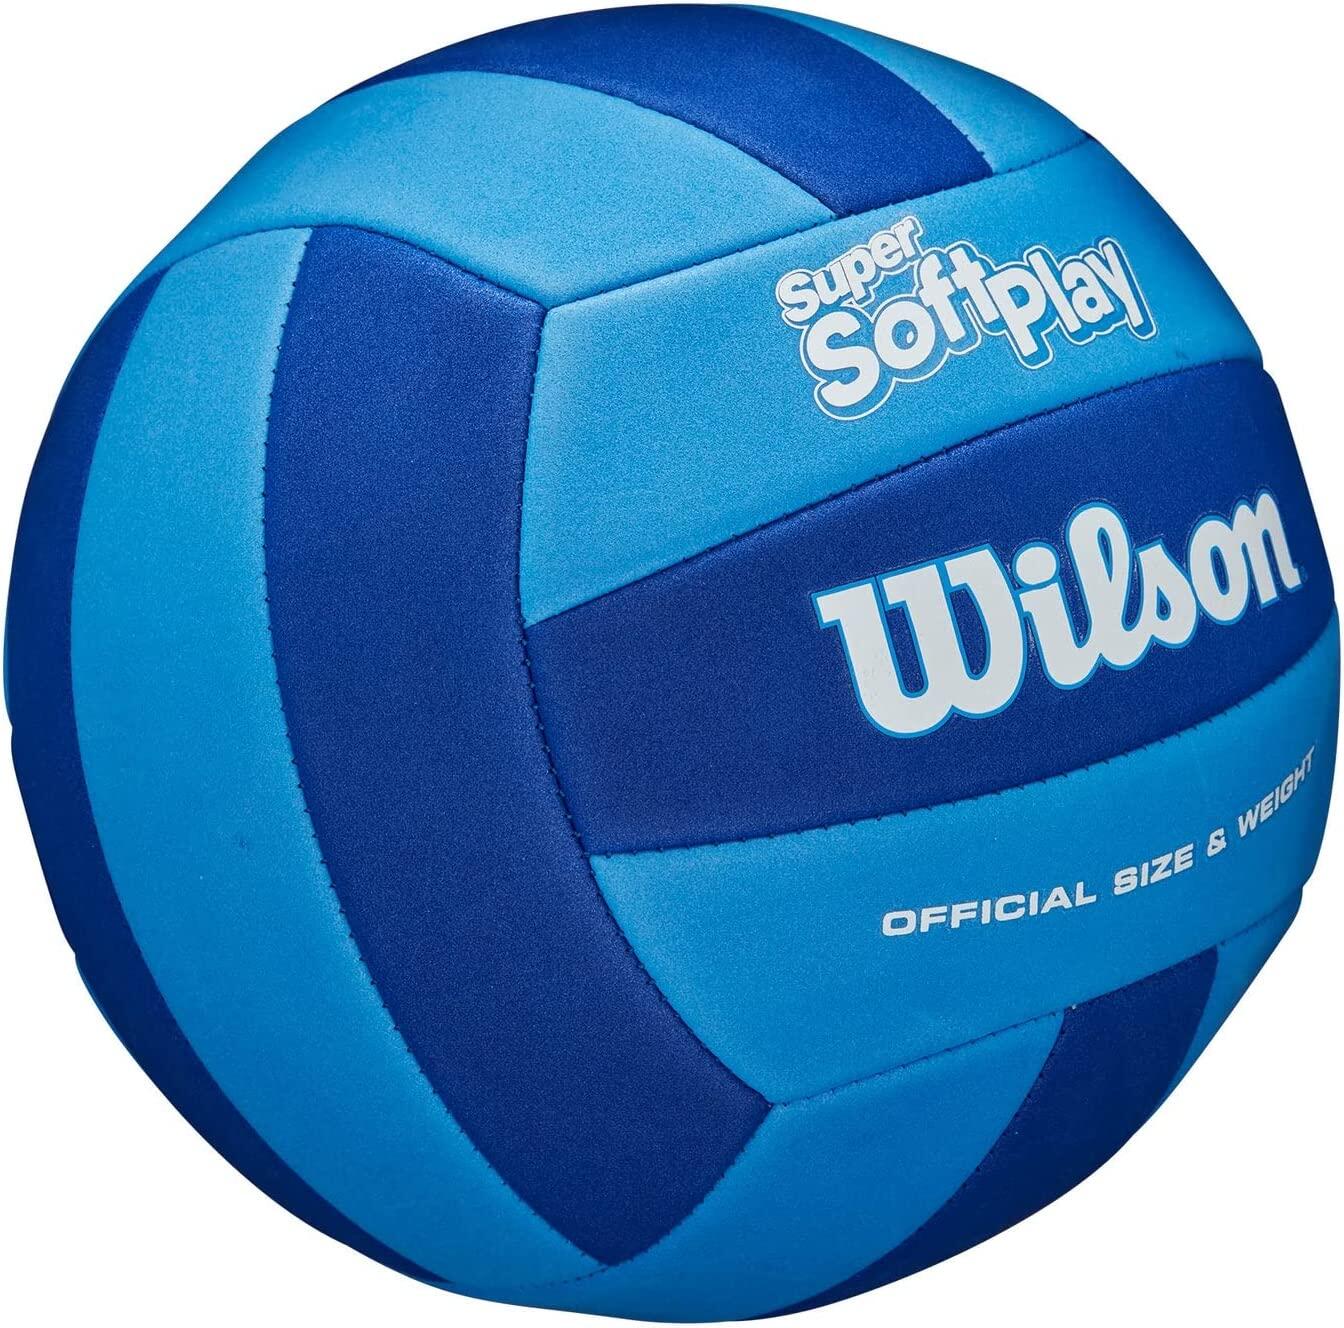 WILSON SUPER SOFT PLAY VOLLEYBALL - OFFICIAL SIZE 2/6